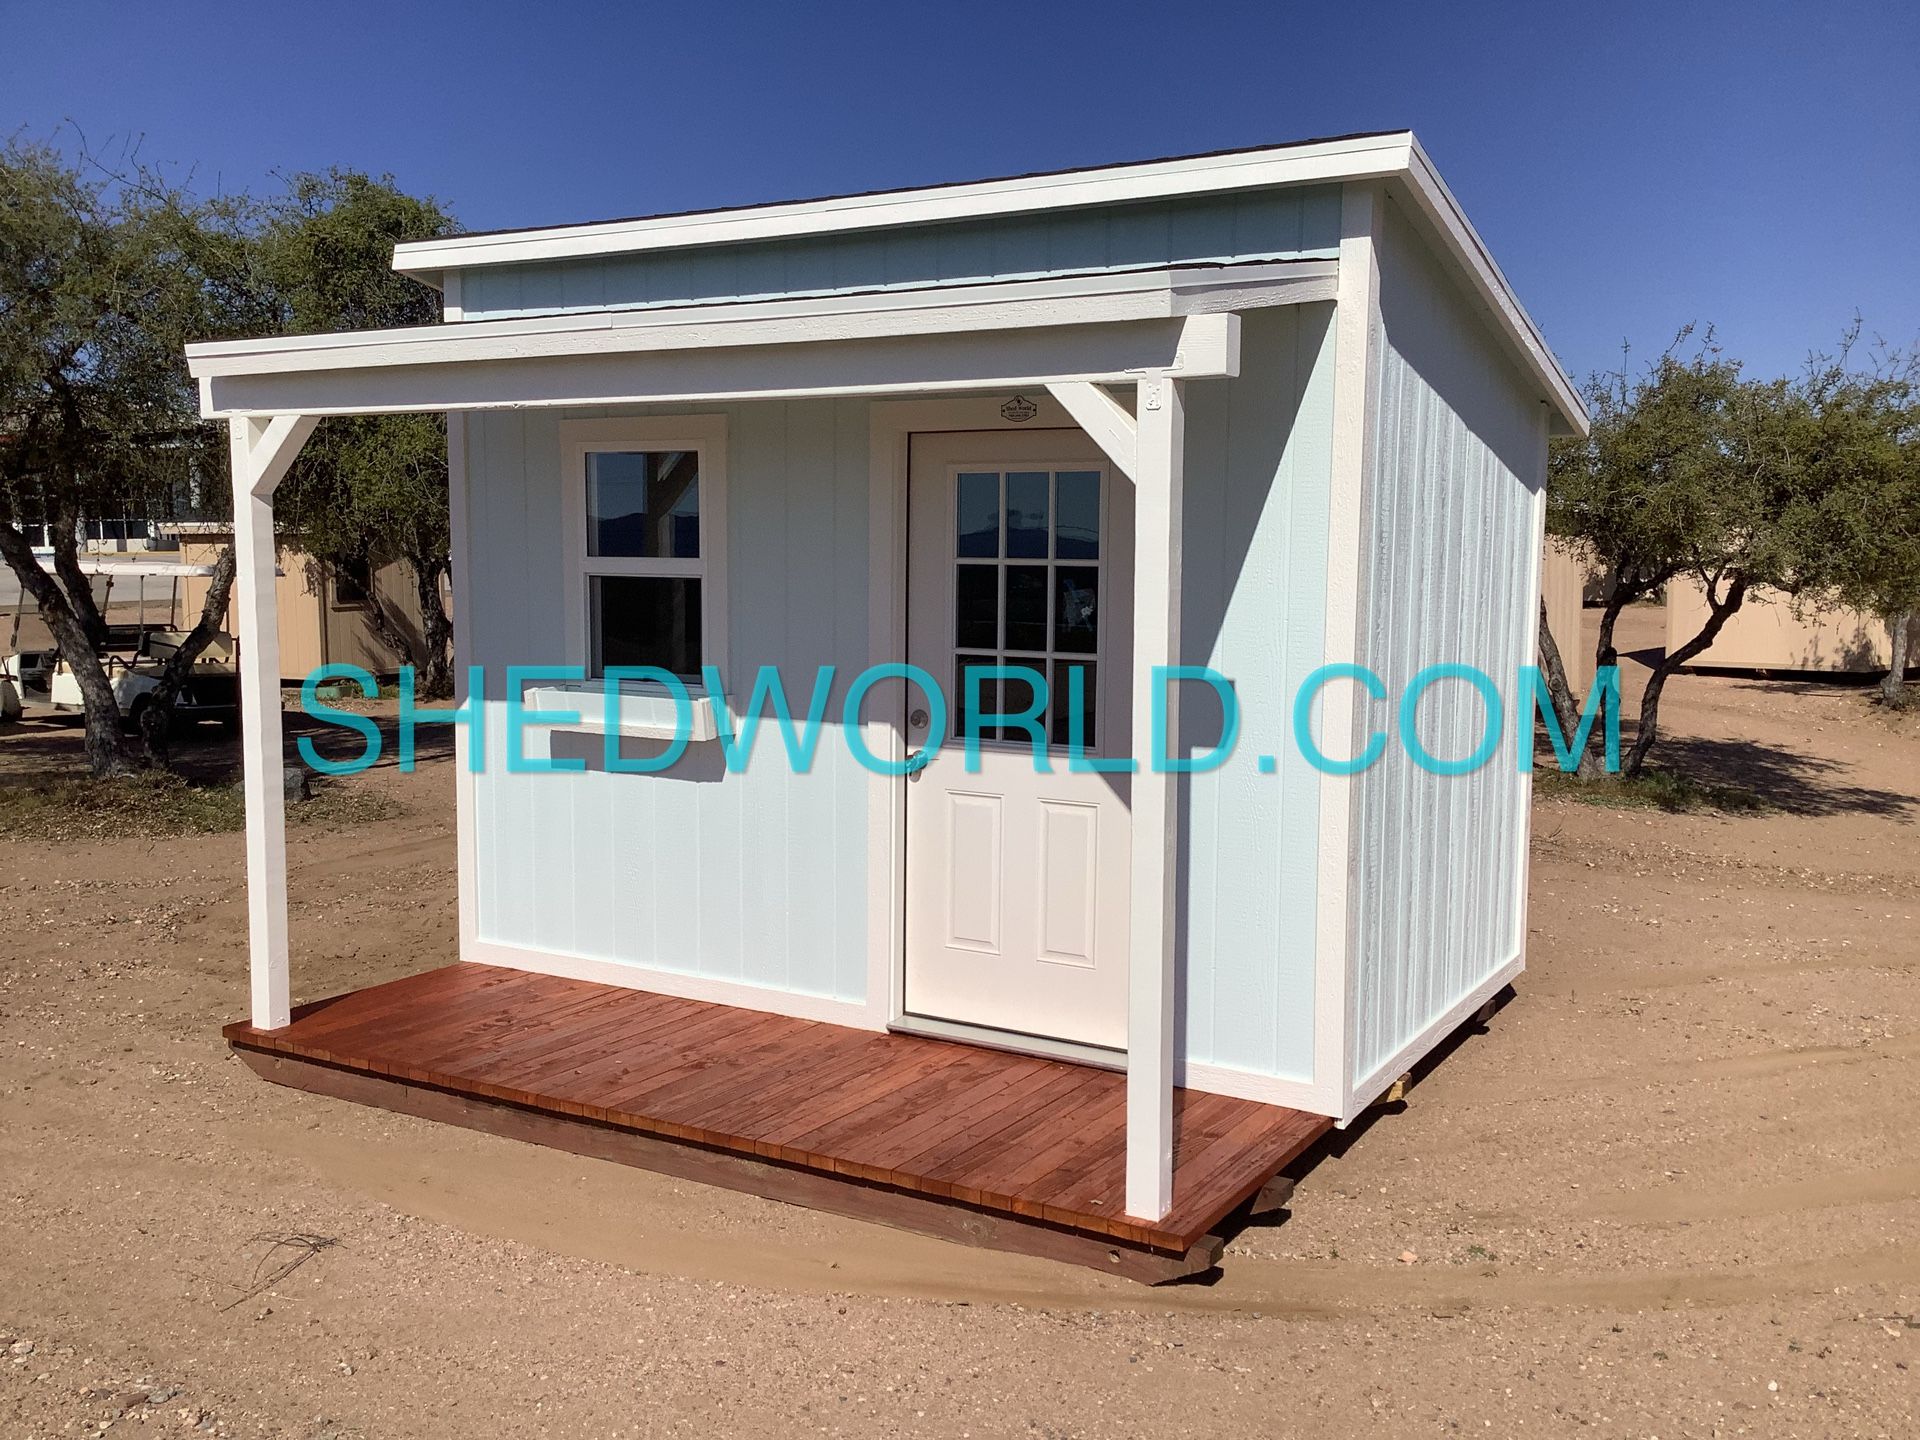 8x12 She Shed $7847.85 Plus Delivery